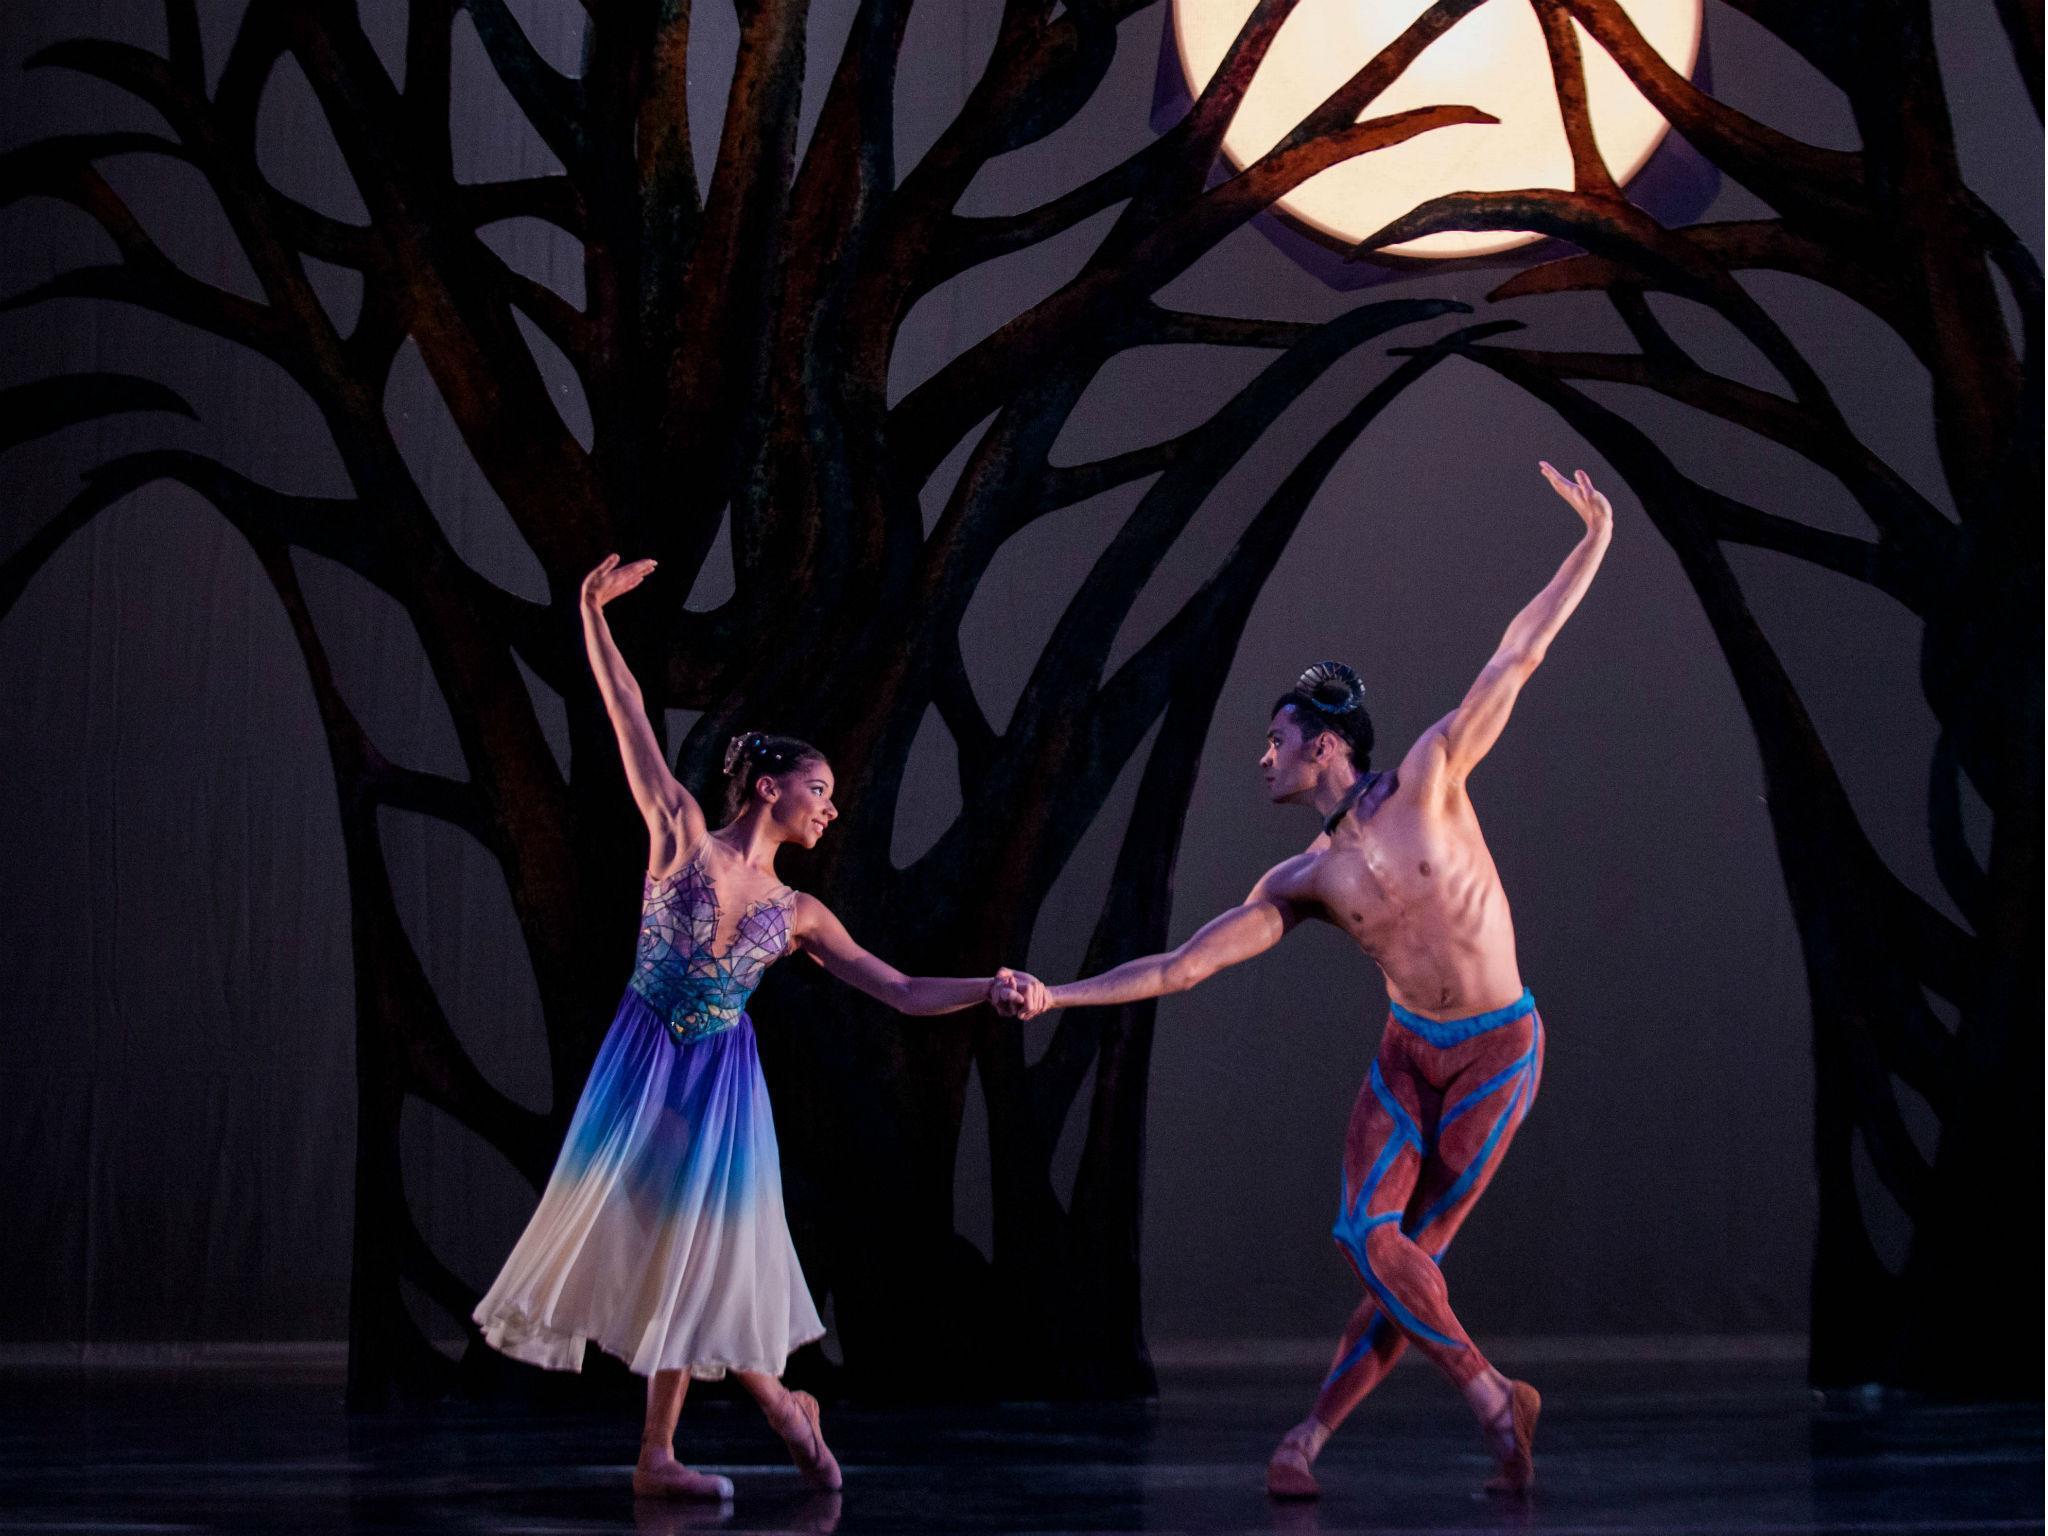 Céline Gittens as Selene and Brandon Lawrence as Pan in the world premiere of 'Arcadia' at the Birmingham Hippodrome